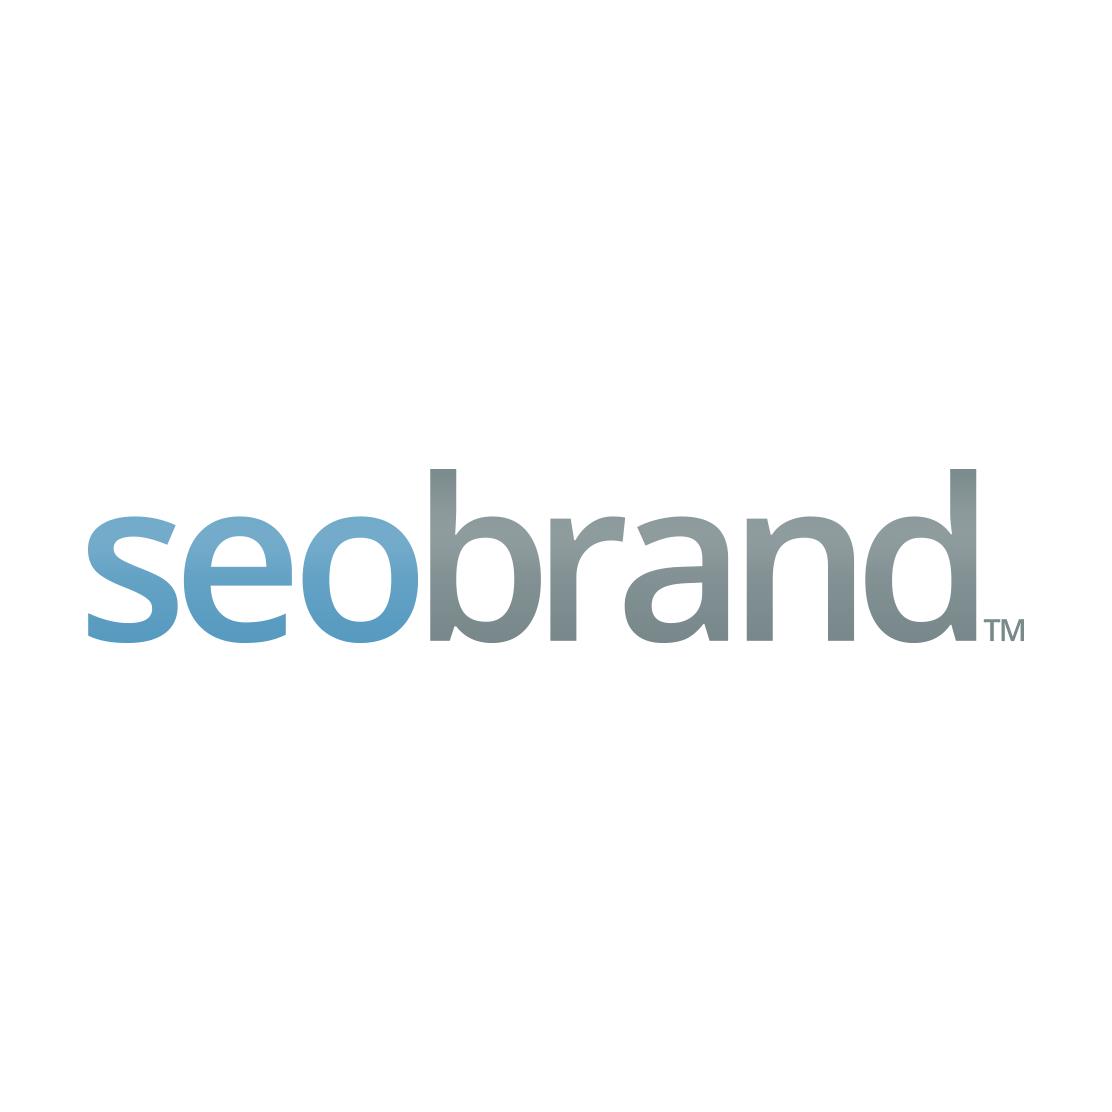 Top Philly SEO Business Logo: SEO Brand